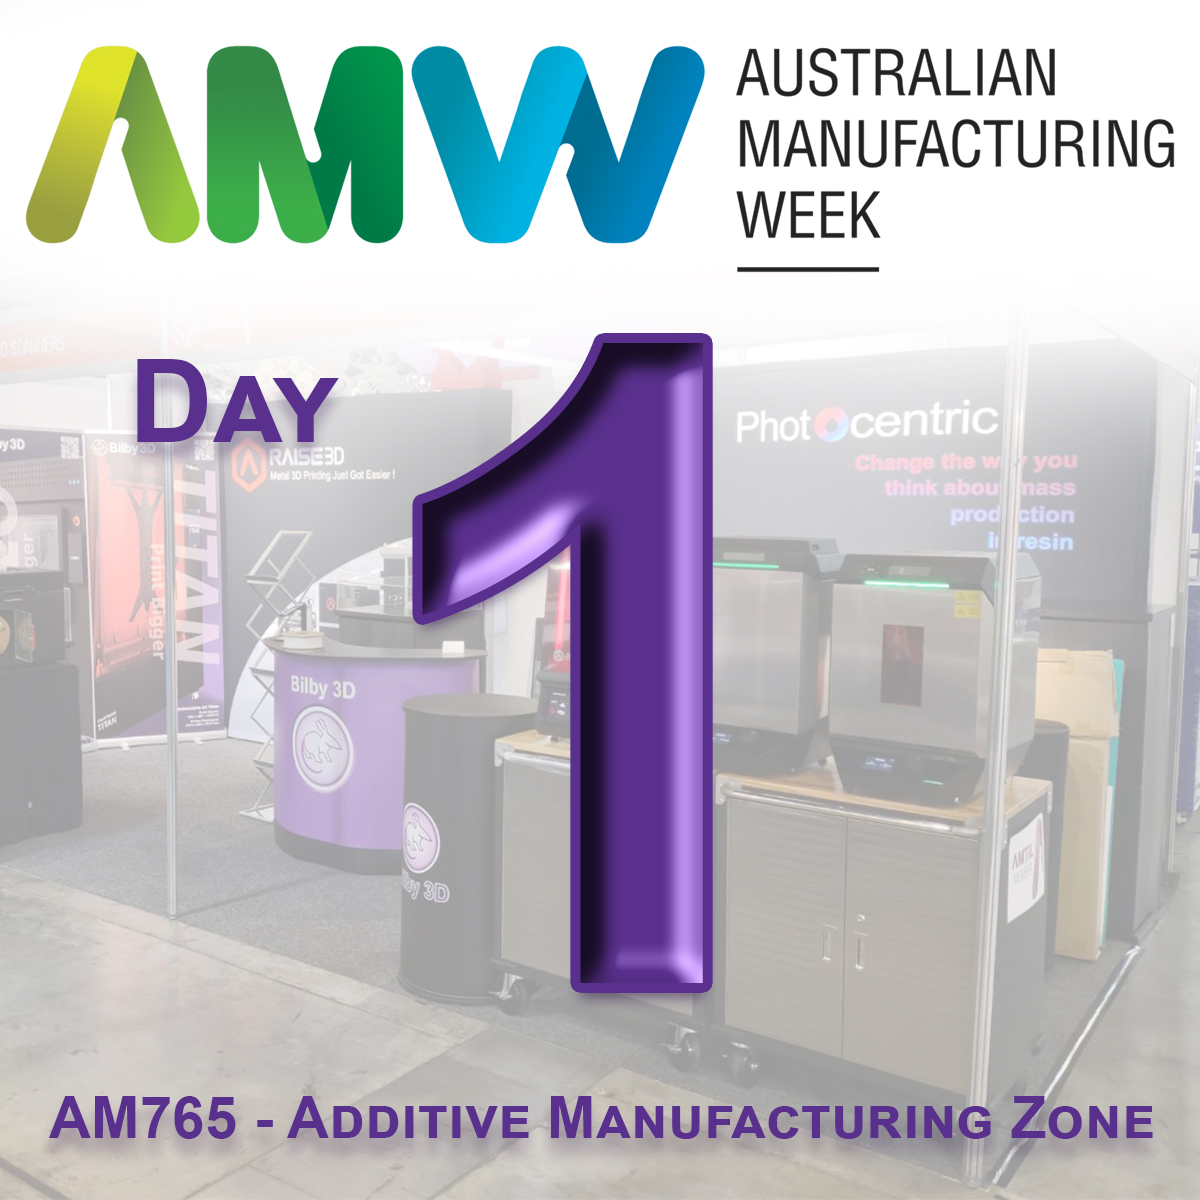 AMW is here and so are we!

Day 1 of the 3 day event is underway and if you haven't come to see us already make your way down to booth AM765.
Explore the endless possibilities that our additive manufacturing solutions can do for you and your business!

@AMTIL_AUS #AMW24 #expo